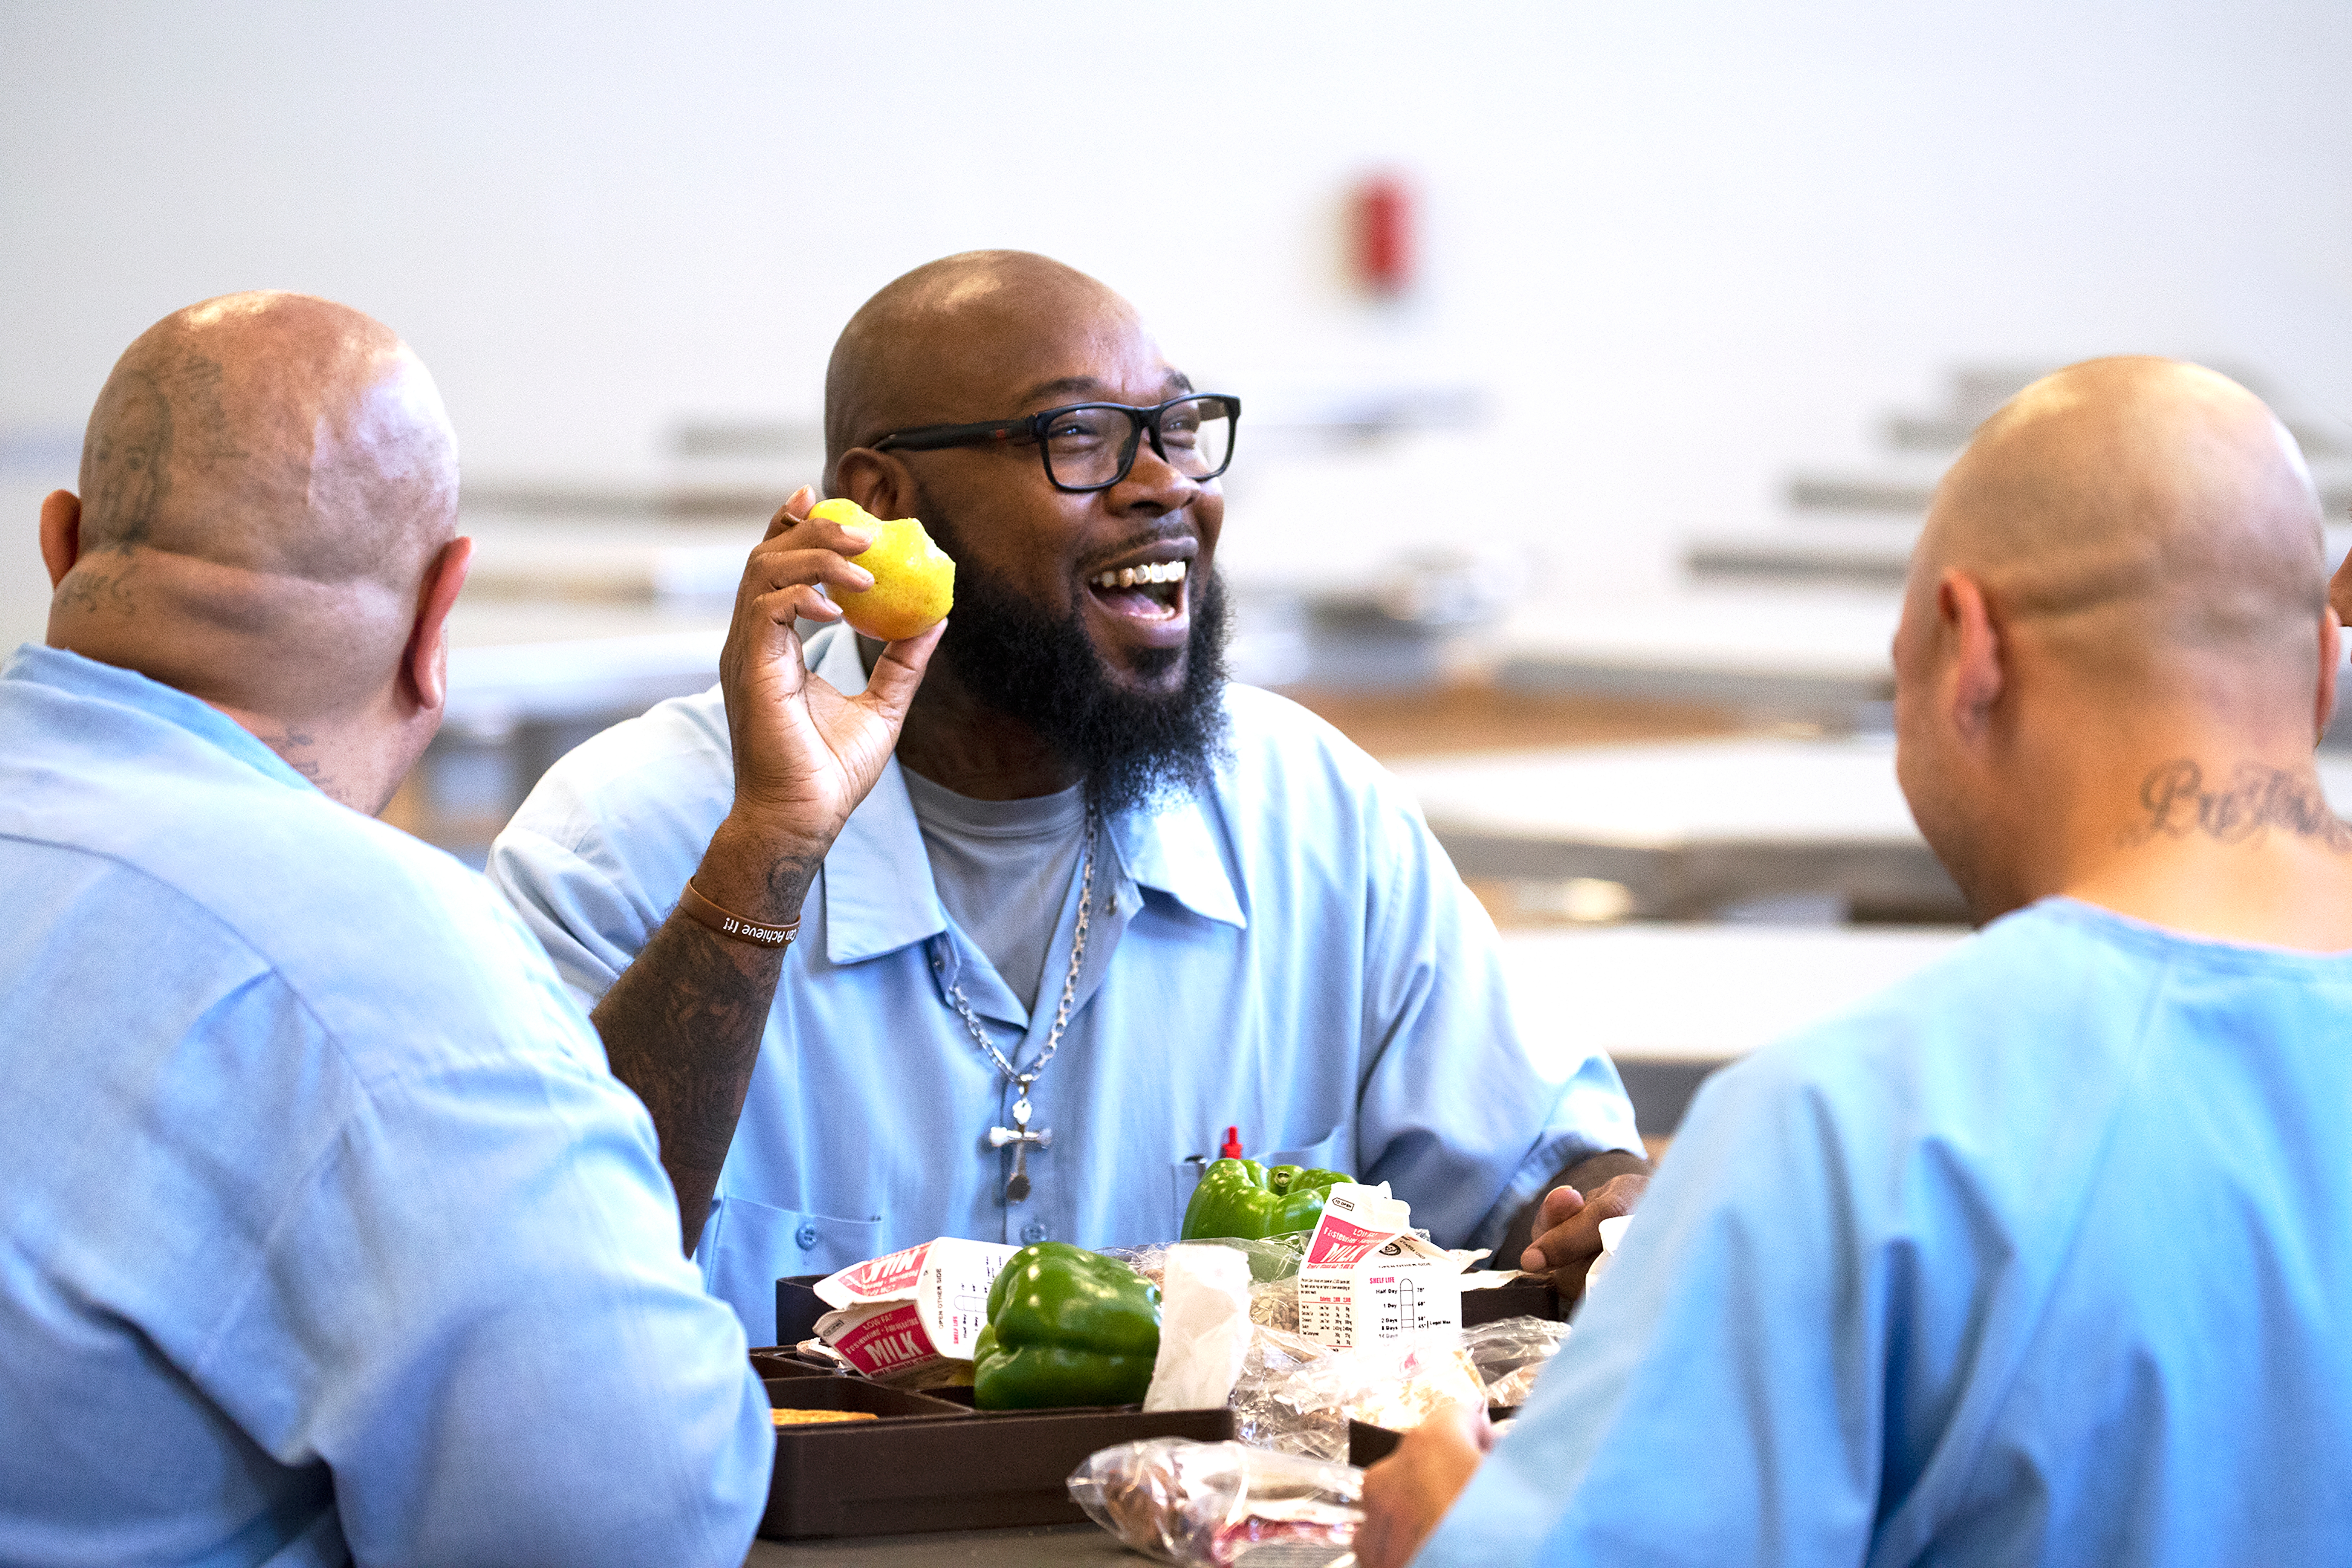 Incarcerated men give back to community - Inside CDCR